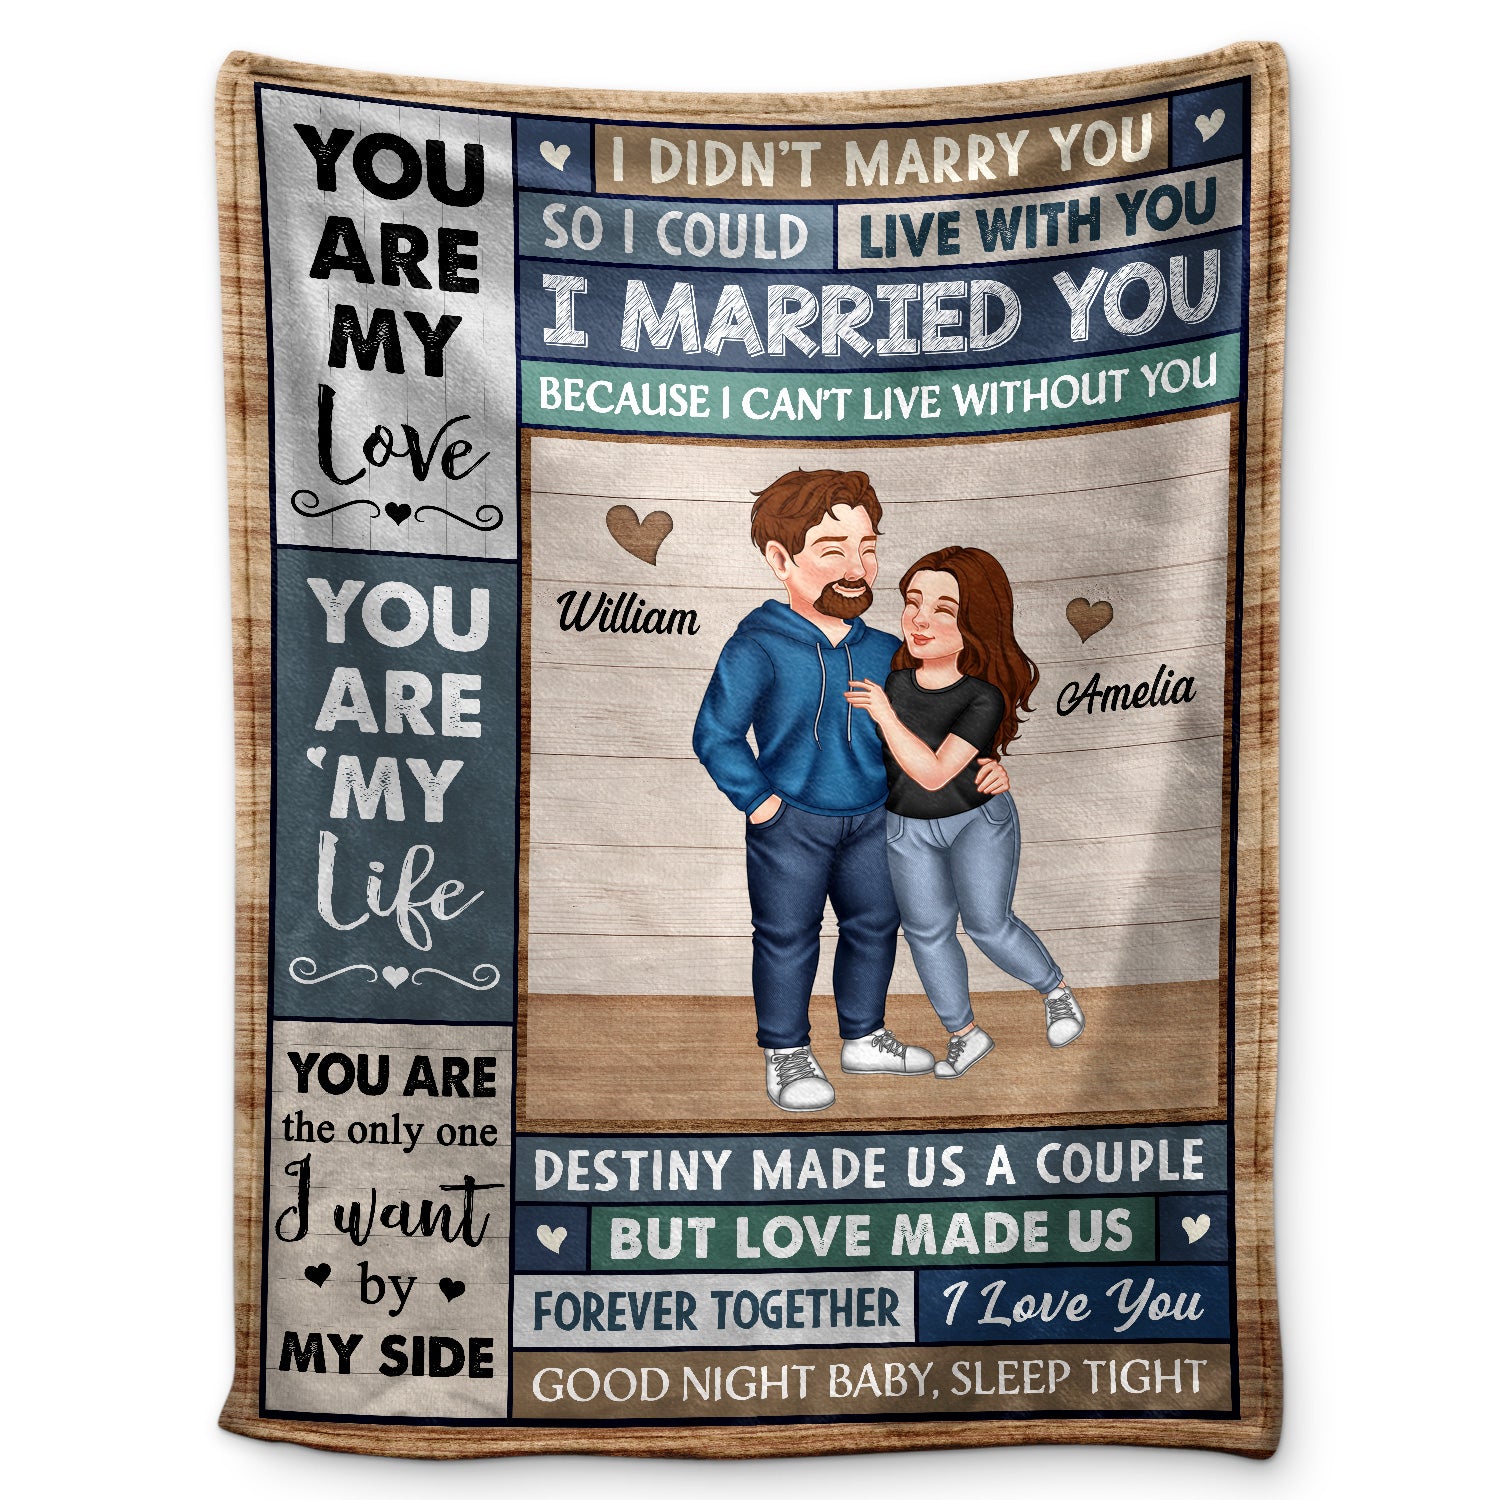 I Married You Because I Can't Live Without You Arm In Arm - Loving, Anniversary Gift For Couples, Husband, Wife - Personalized Fleece Blanket